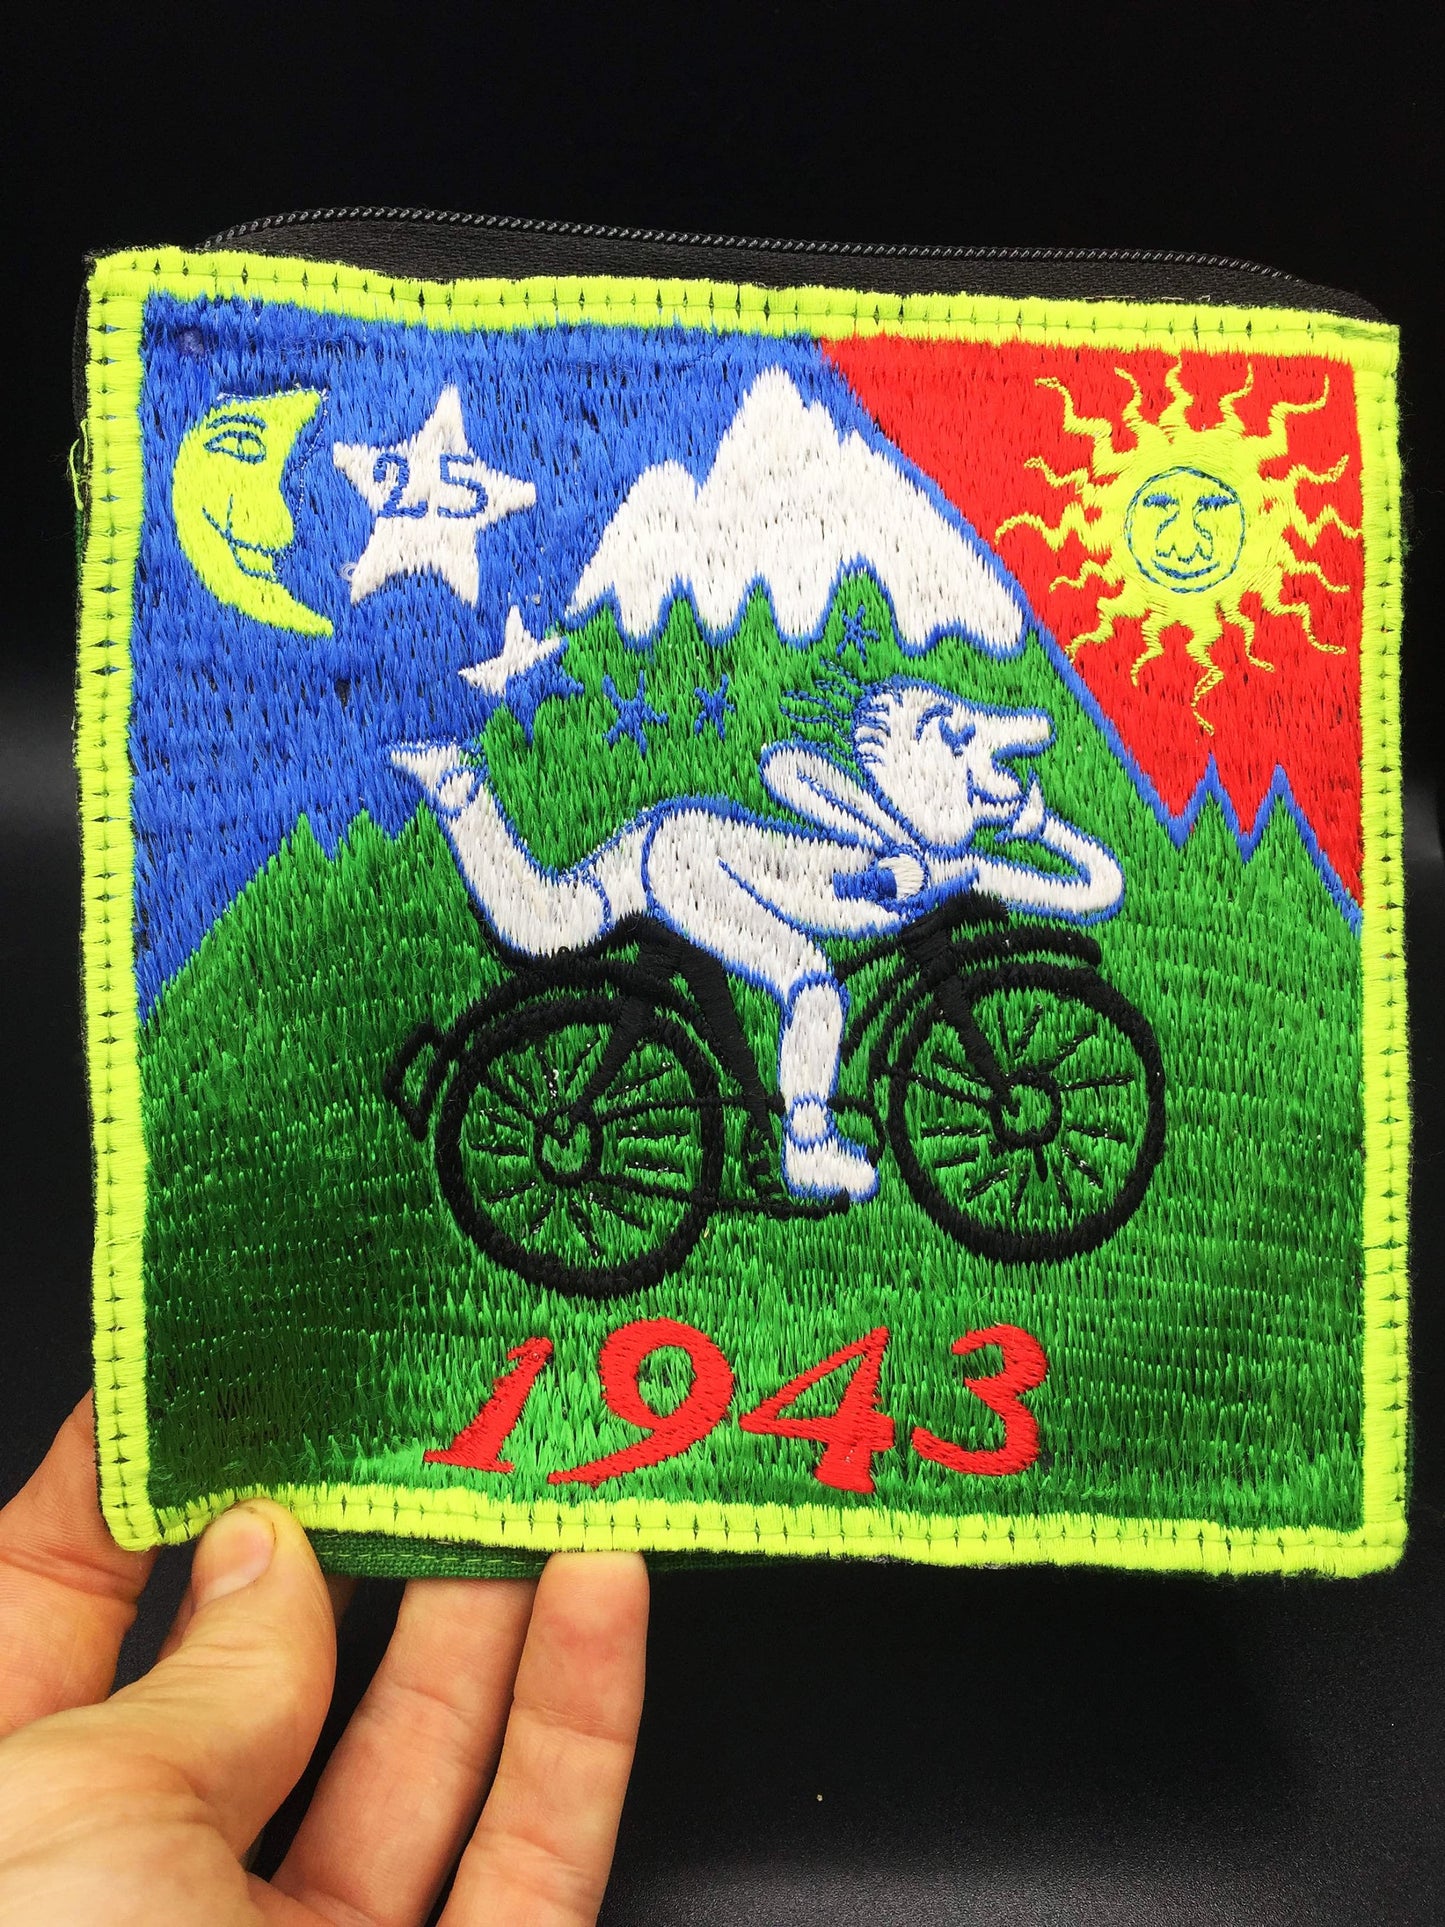 Bicycle Day Bag Albert Hofmann 1943 LSD Patch Psychedelic Hippie Timothy Leary with zip lock storagebag Bicycleday